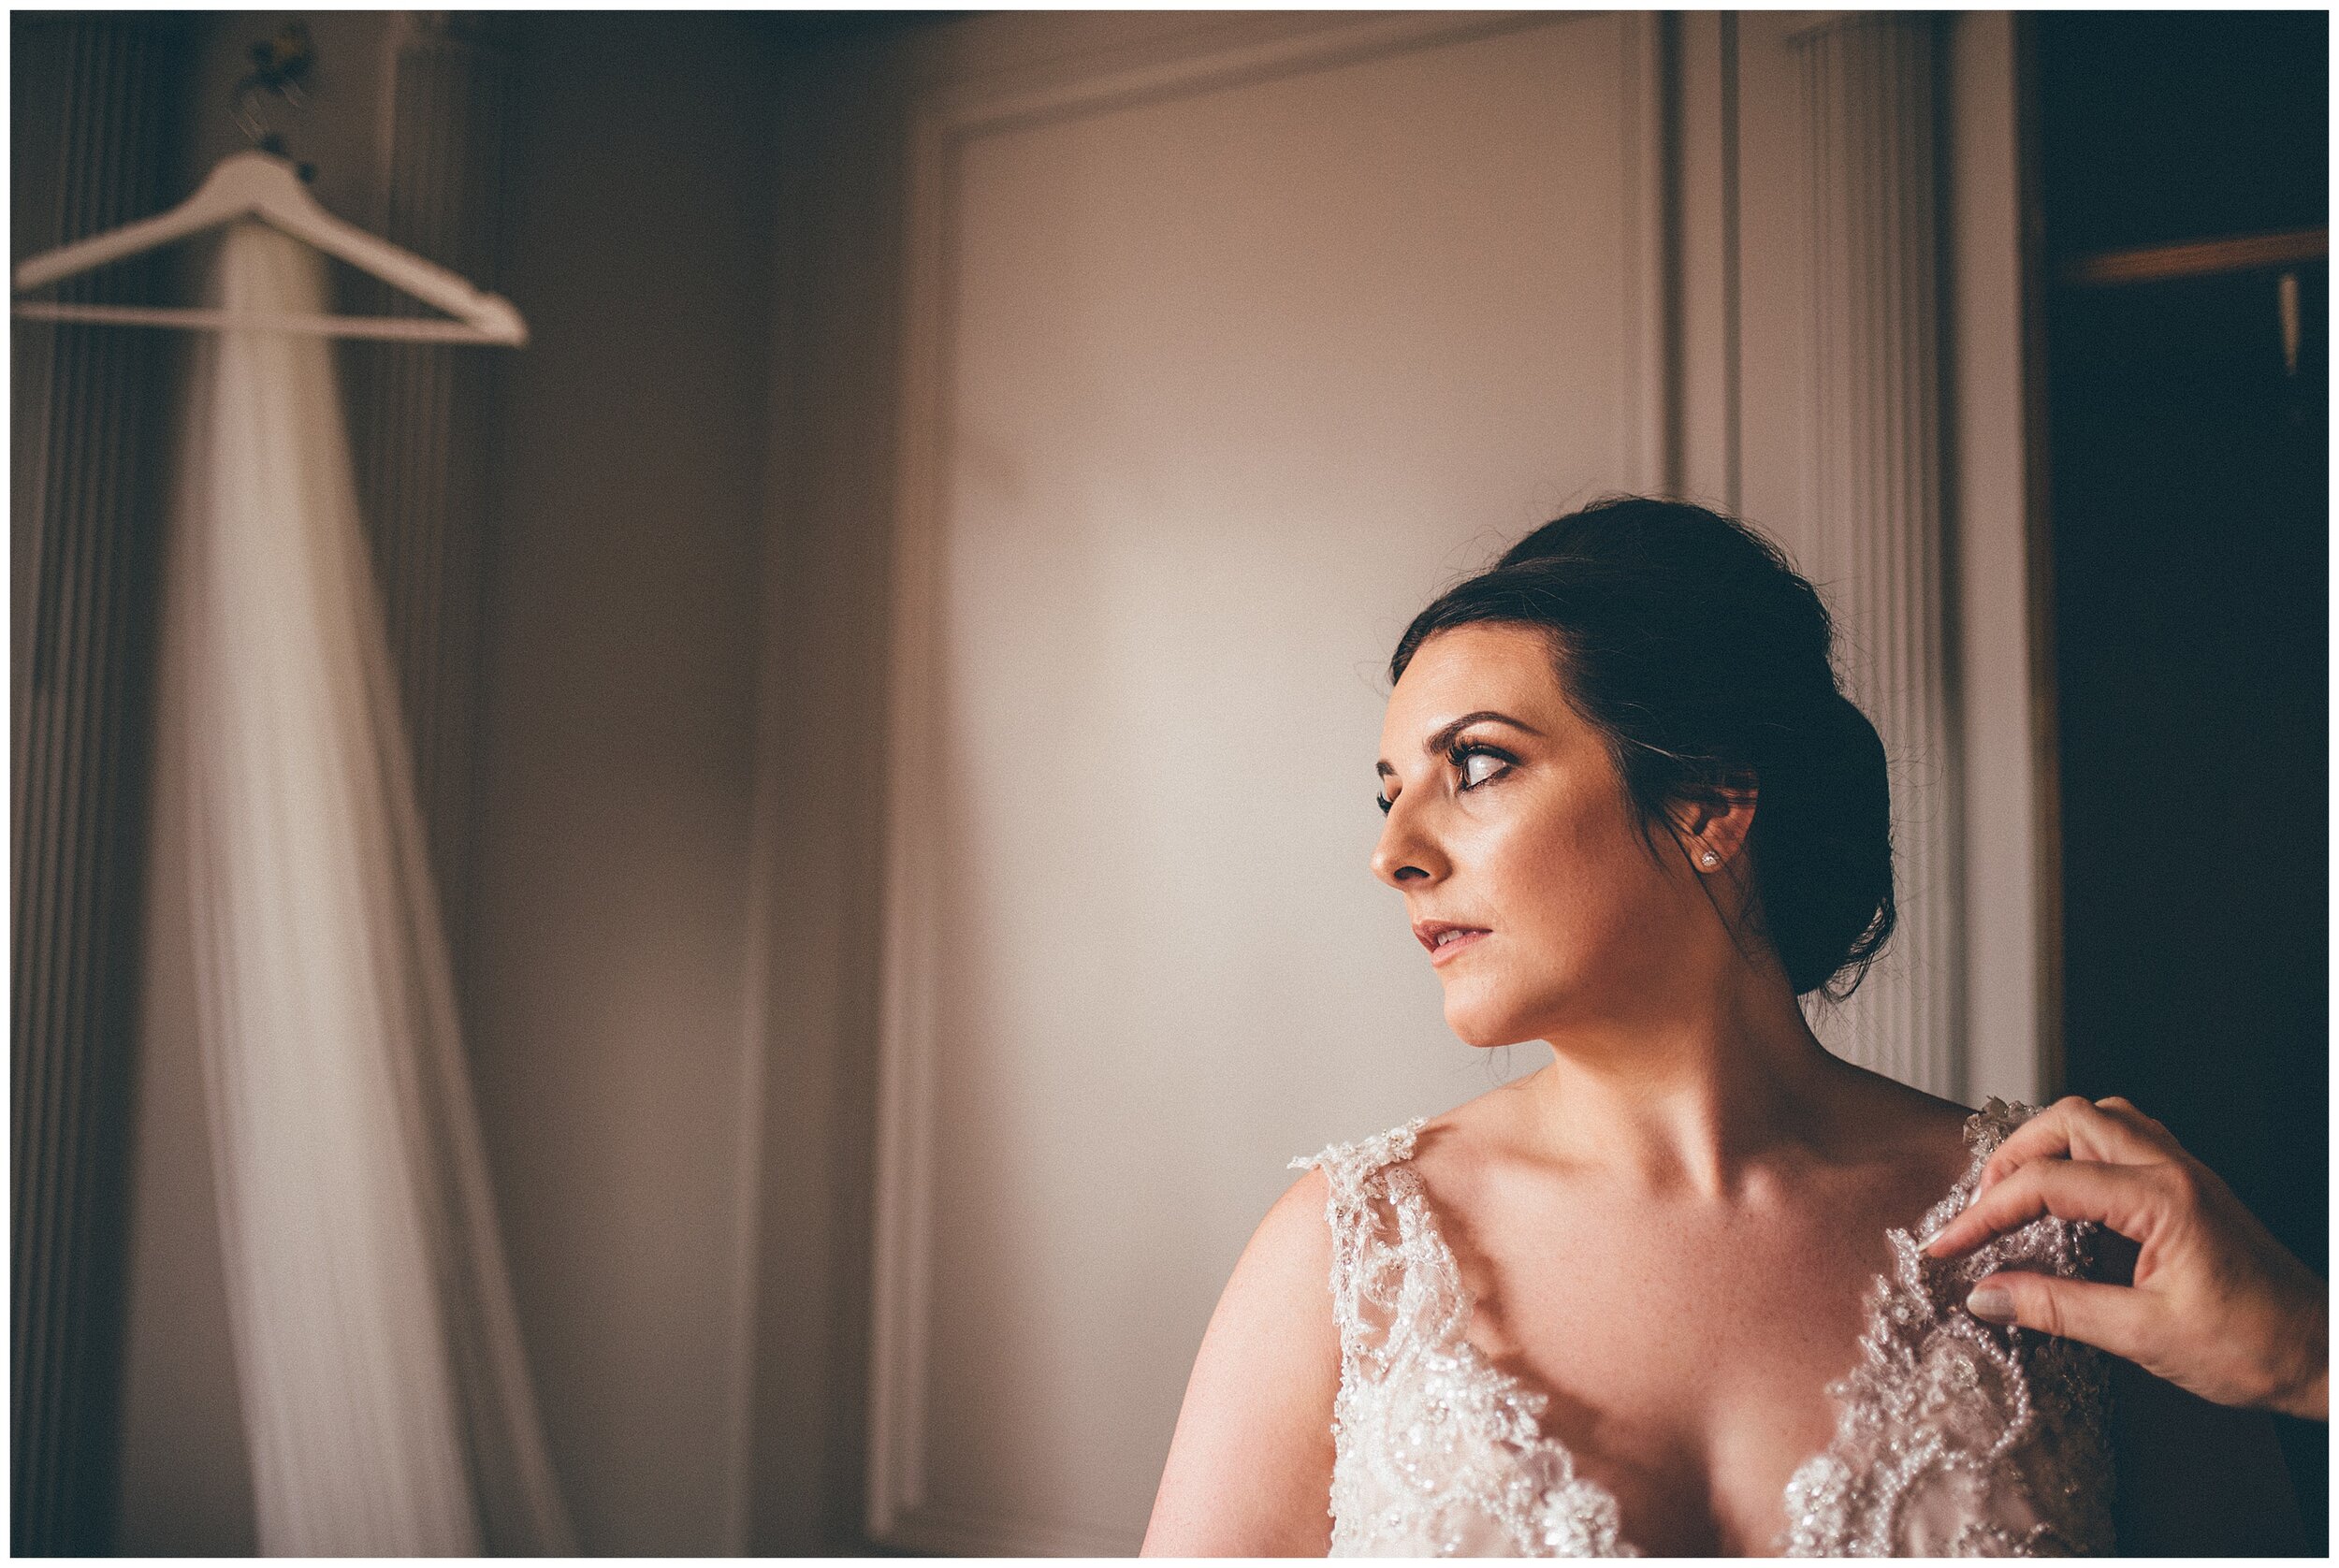 Bride gets ready in the bridal suite at Cheshire summer wedding.